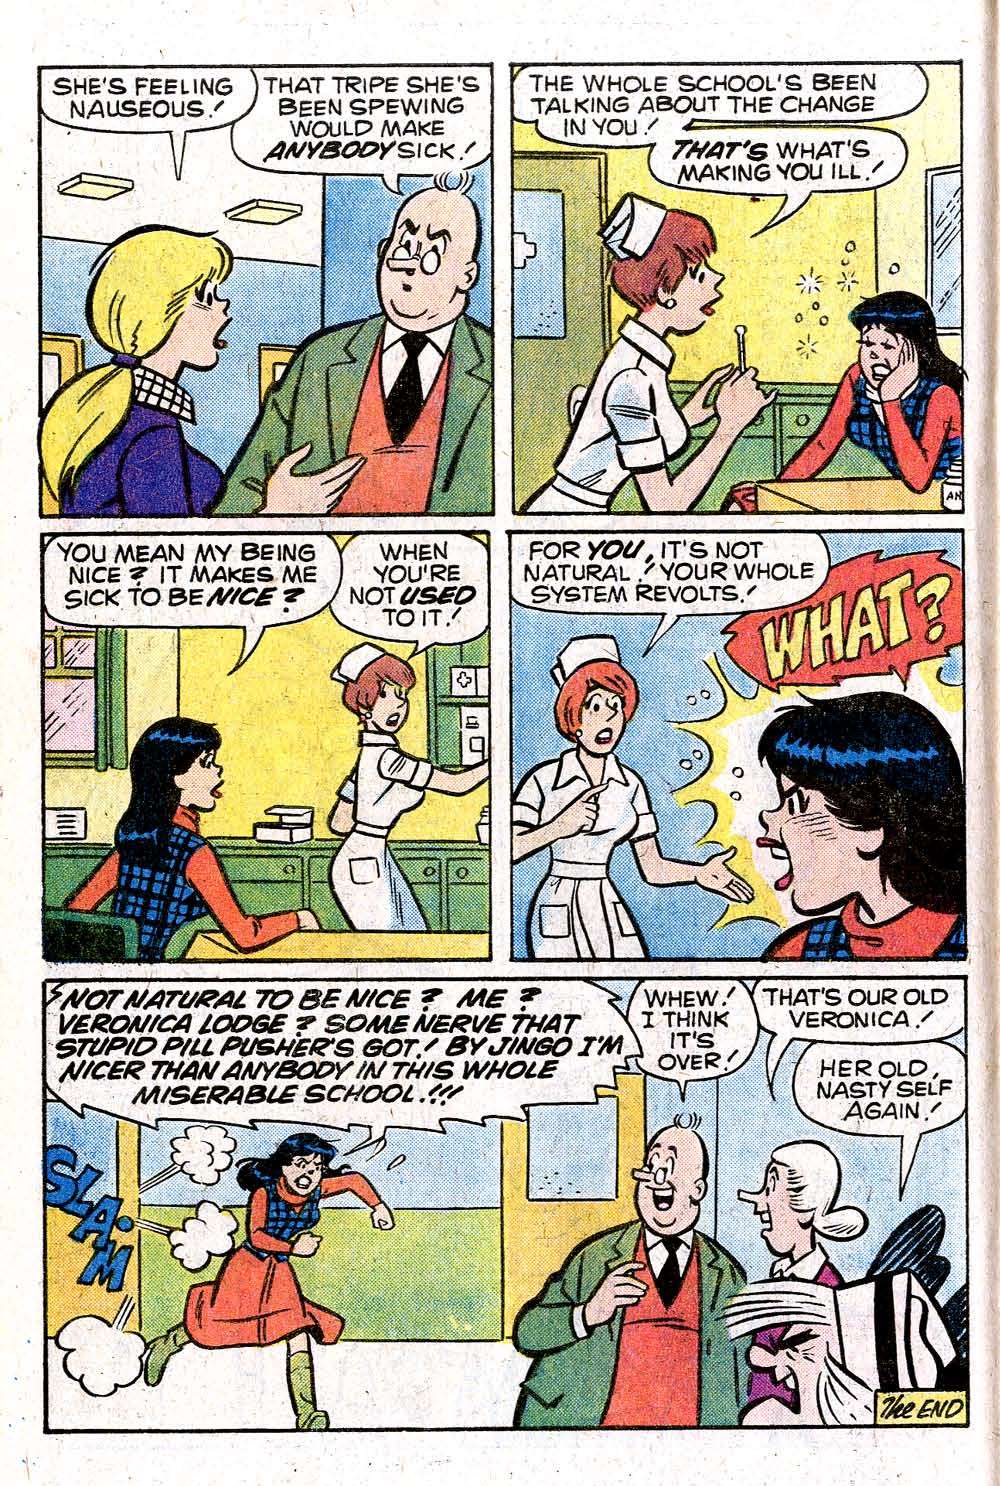 Read online Archie's Girls Betty and Veronica comic -  Issue #270 - 8